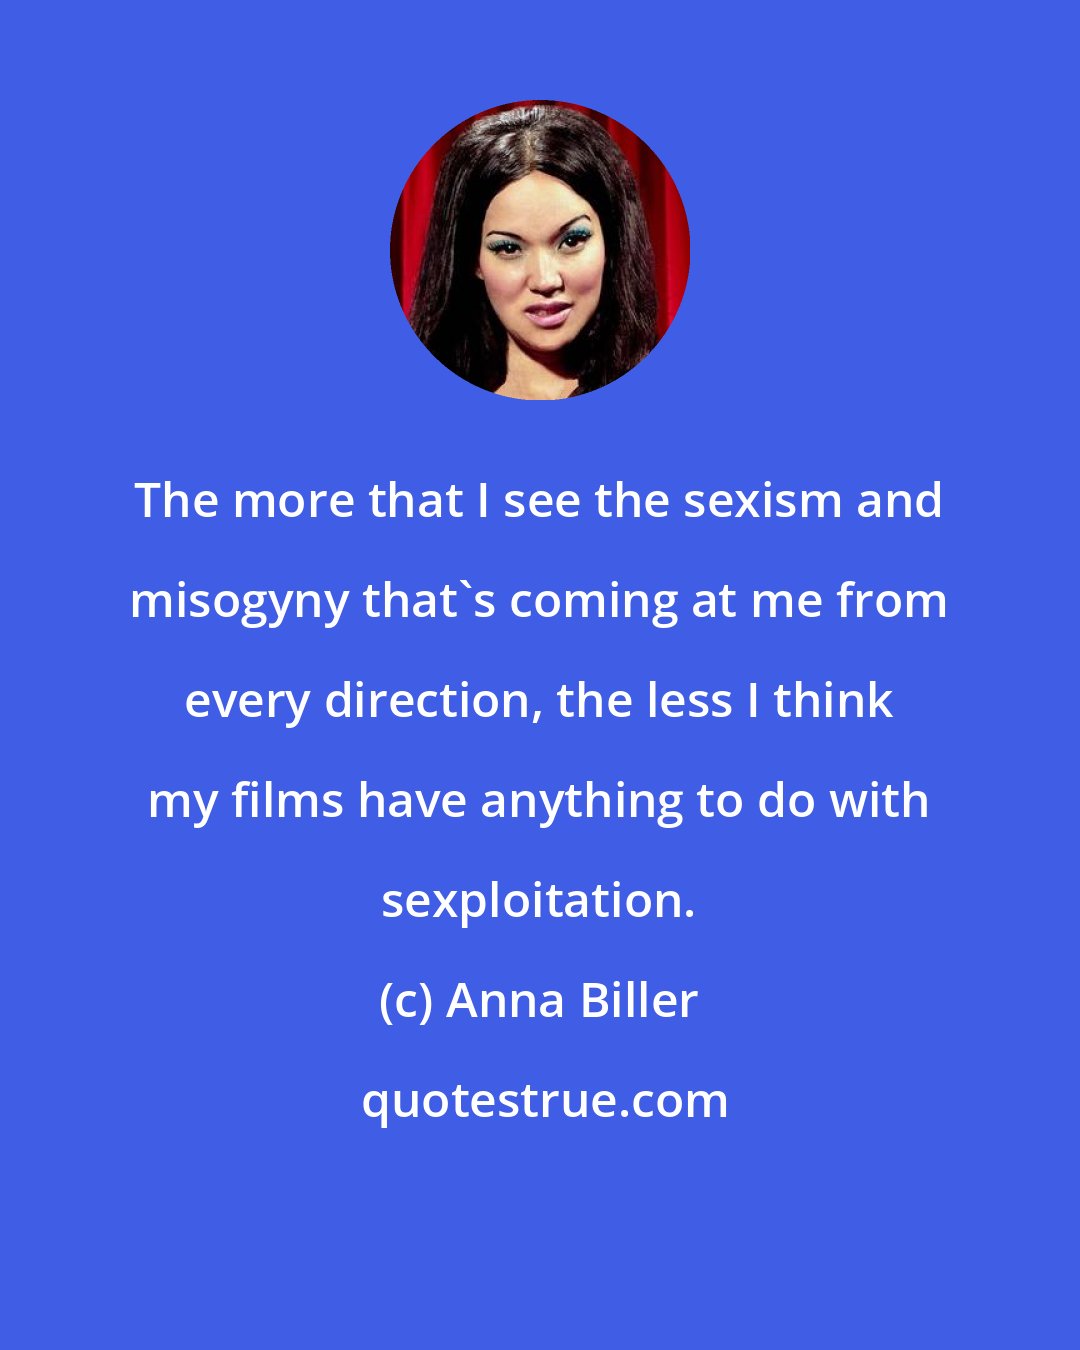 Anna Biller: The more that I see the sexism and misogyny that's coming at me from every direction, the less I think my films have anything to do with sexploitation.